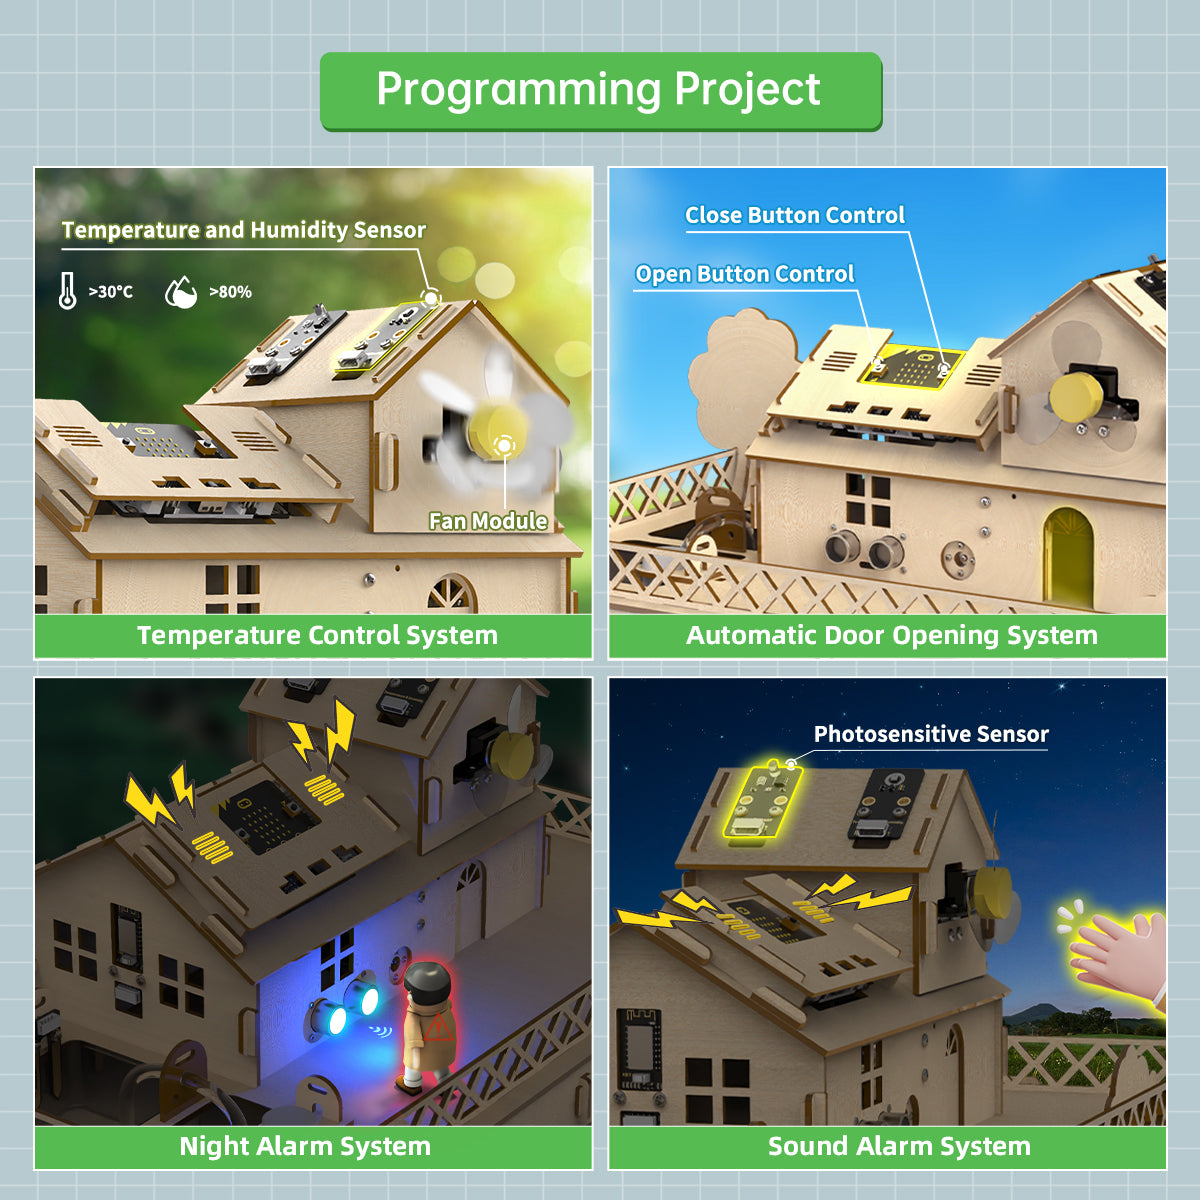 Hiwonder IoT Smart Home Kit for Electronic DIY Education Support micro:bit Programming